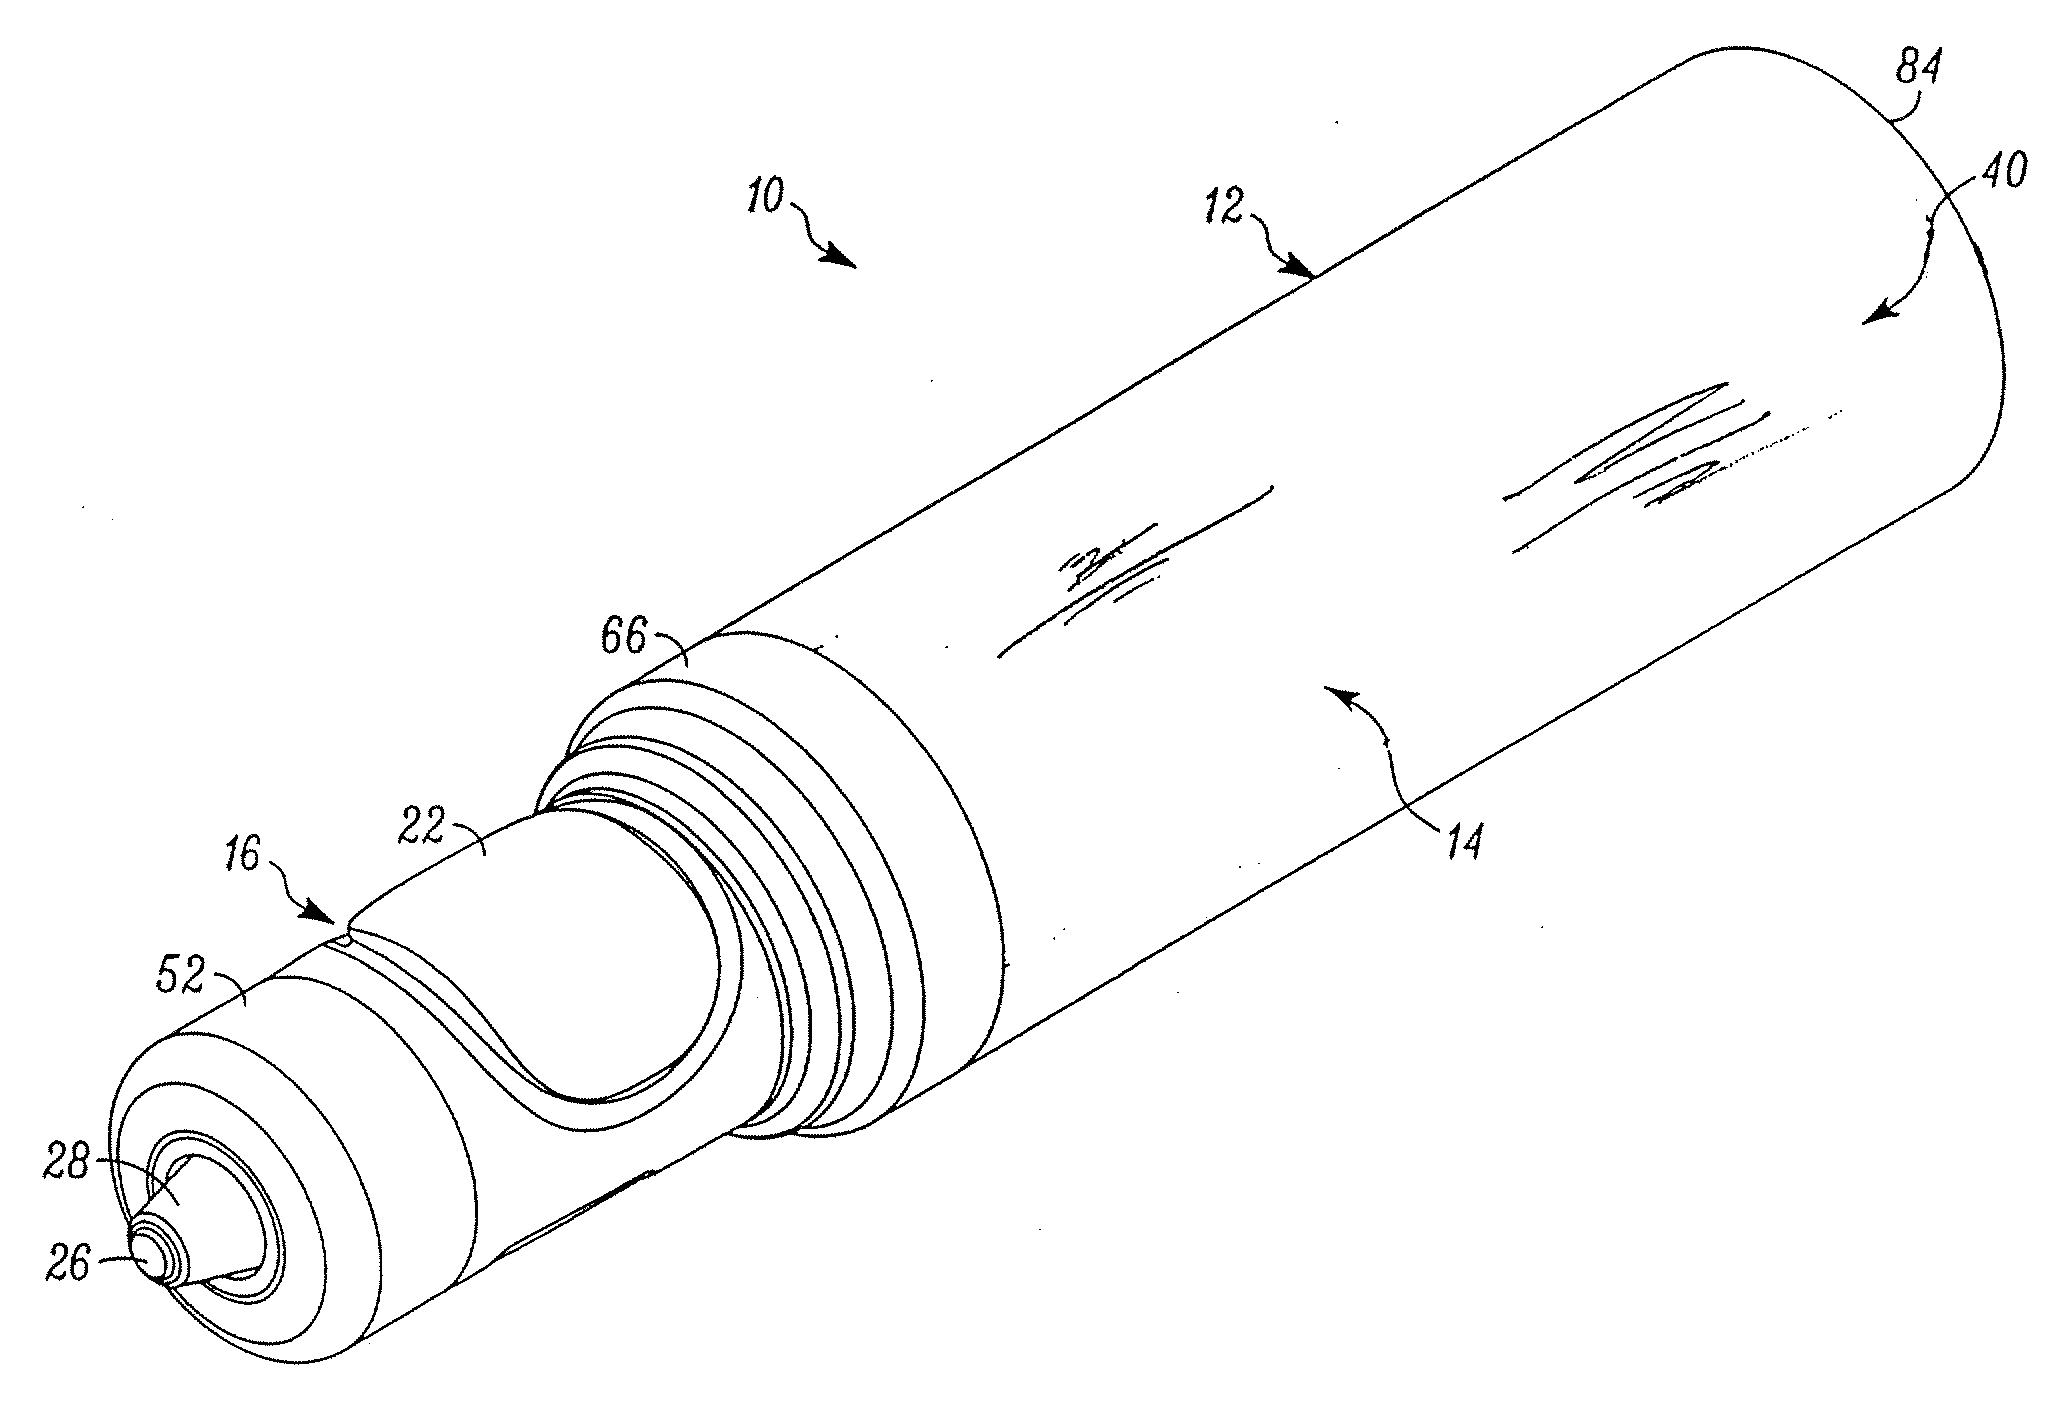 Multiple Dose Delivery Device with Manually Depressible Actuator and One-Way Valve for Storing and Dispensing Substances, and Related Method